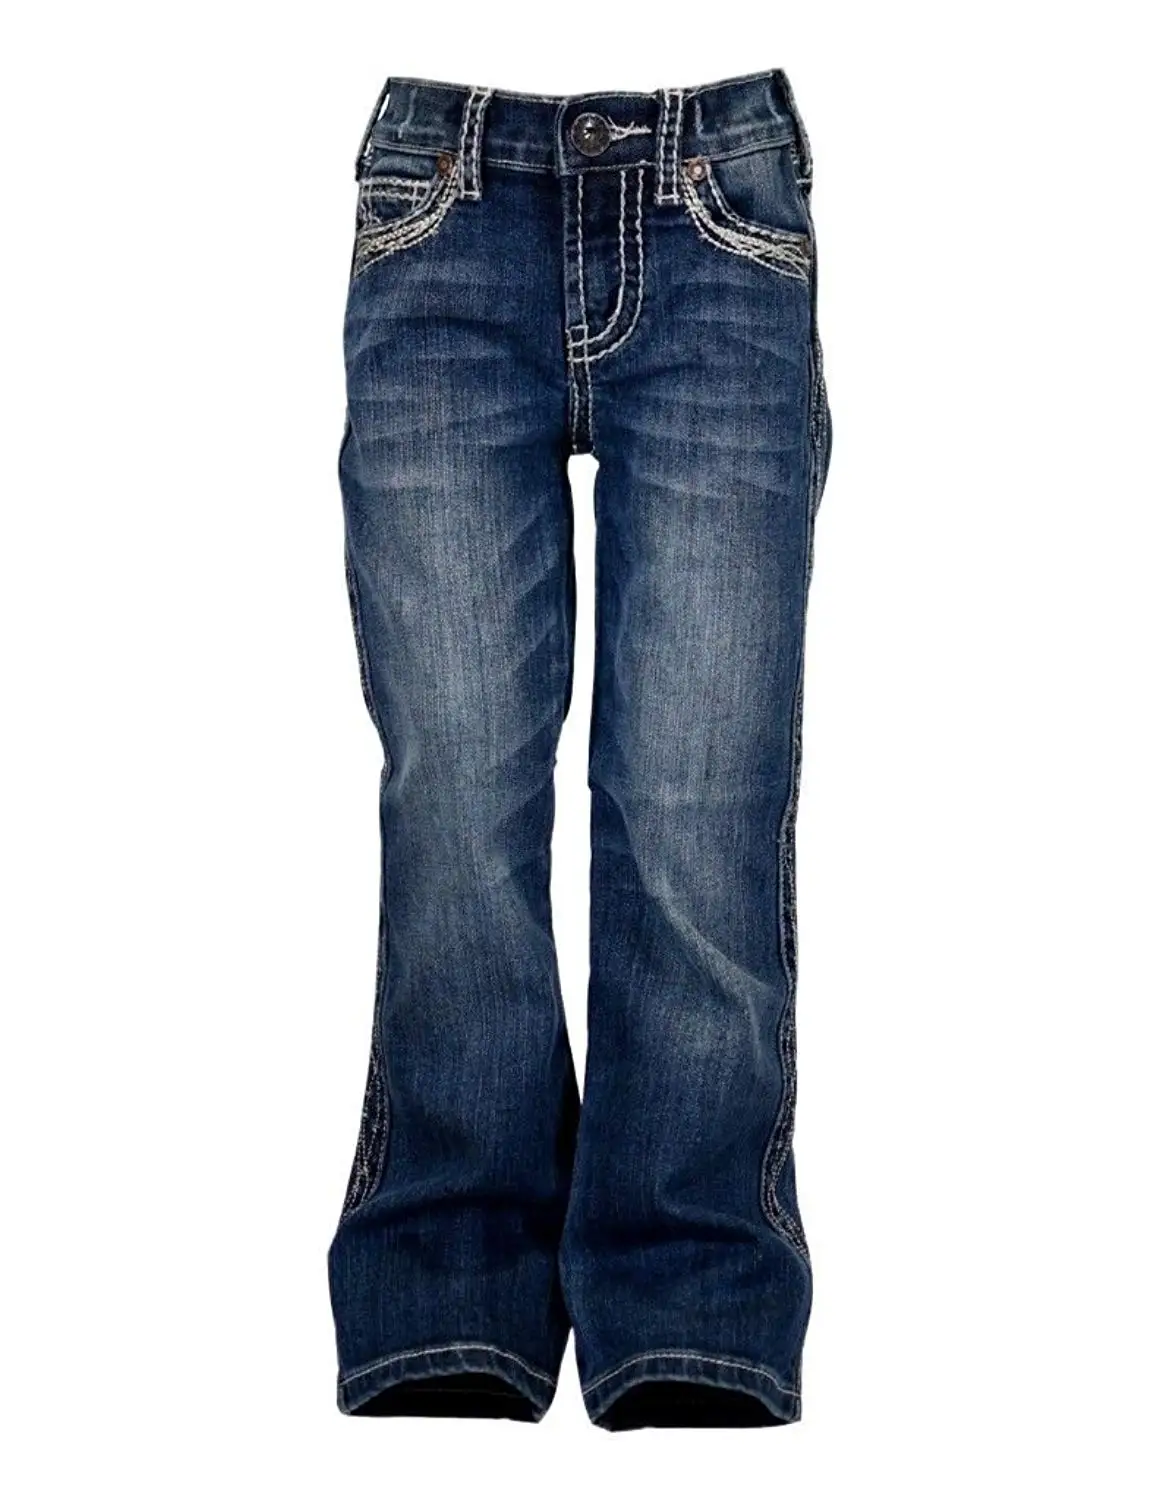 wire jeans price